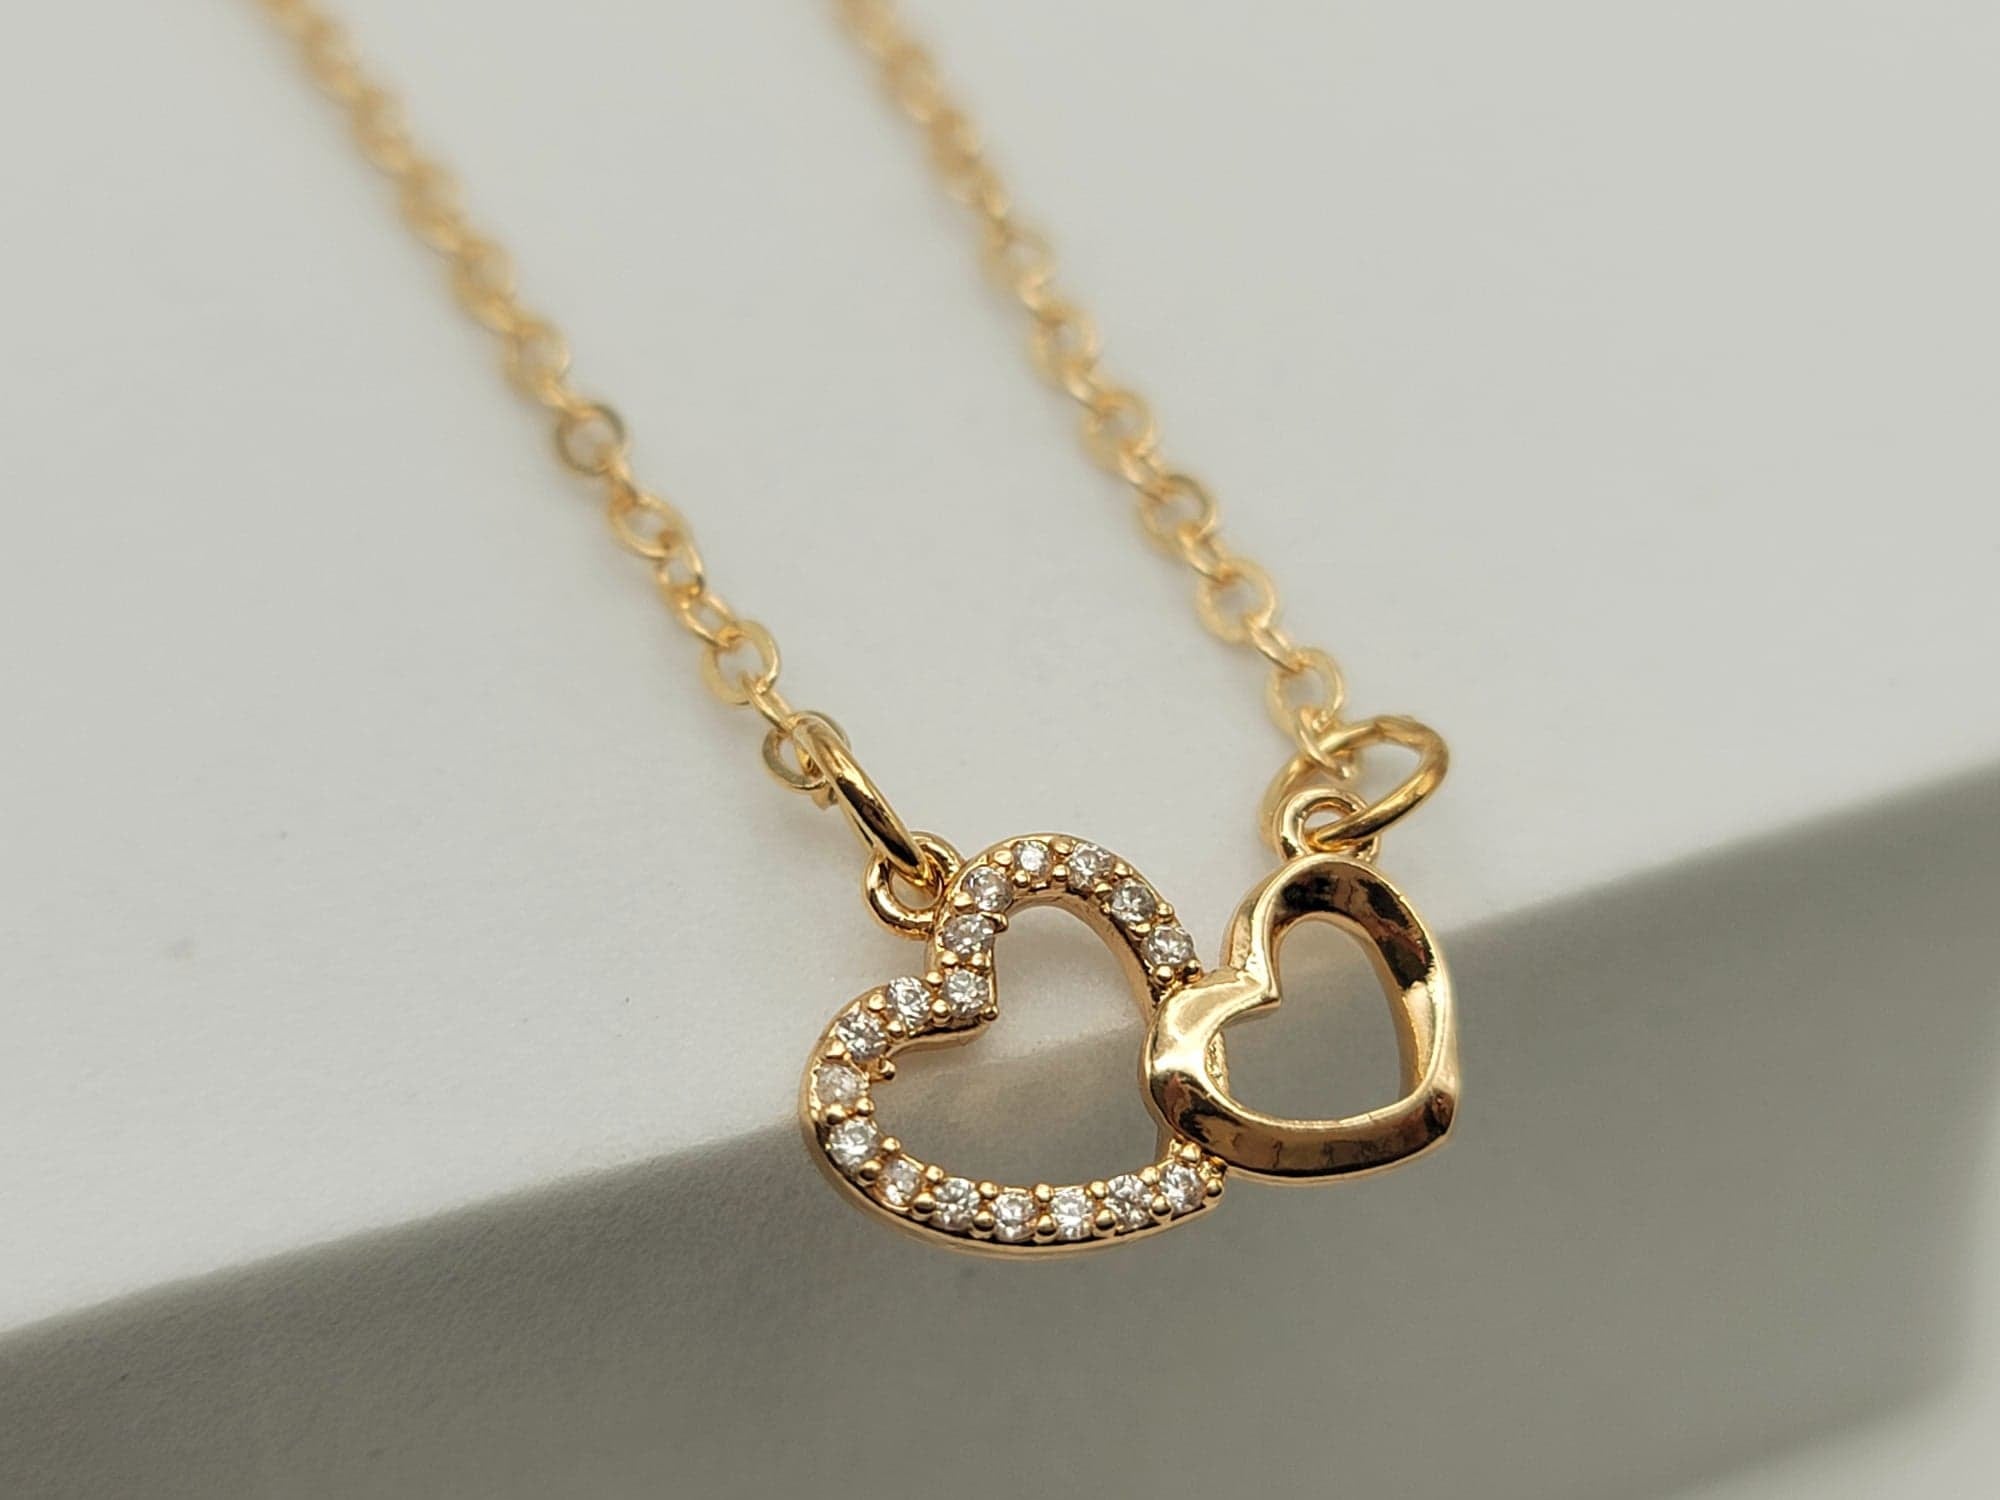 Buy Simple Double Heart Necklace, Dainty Heart Link Necklace